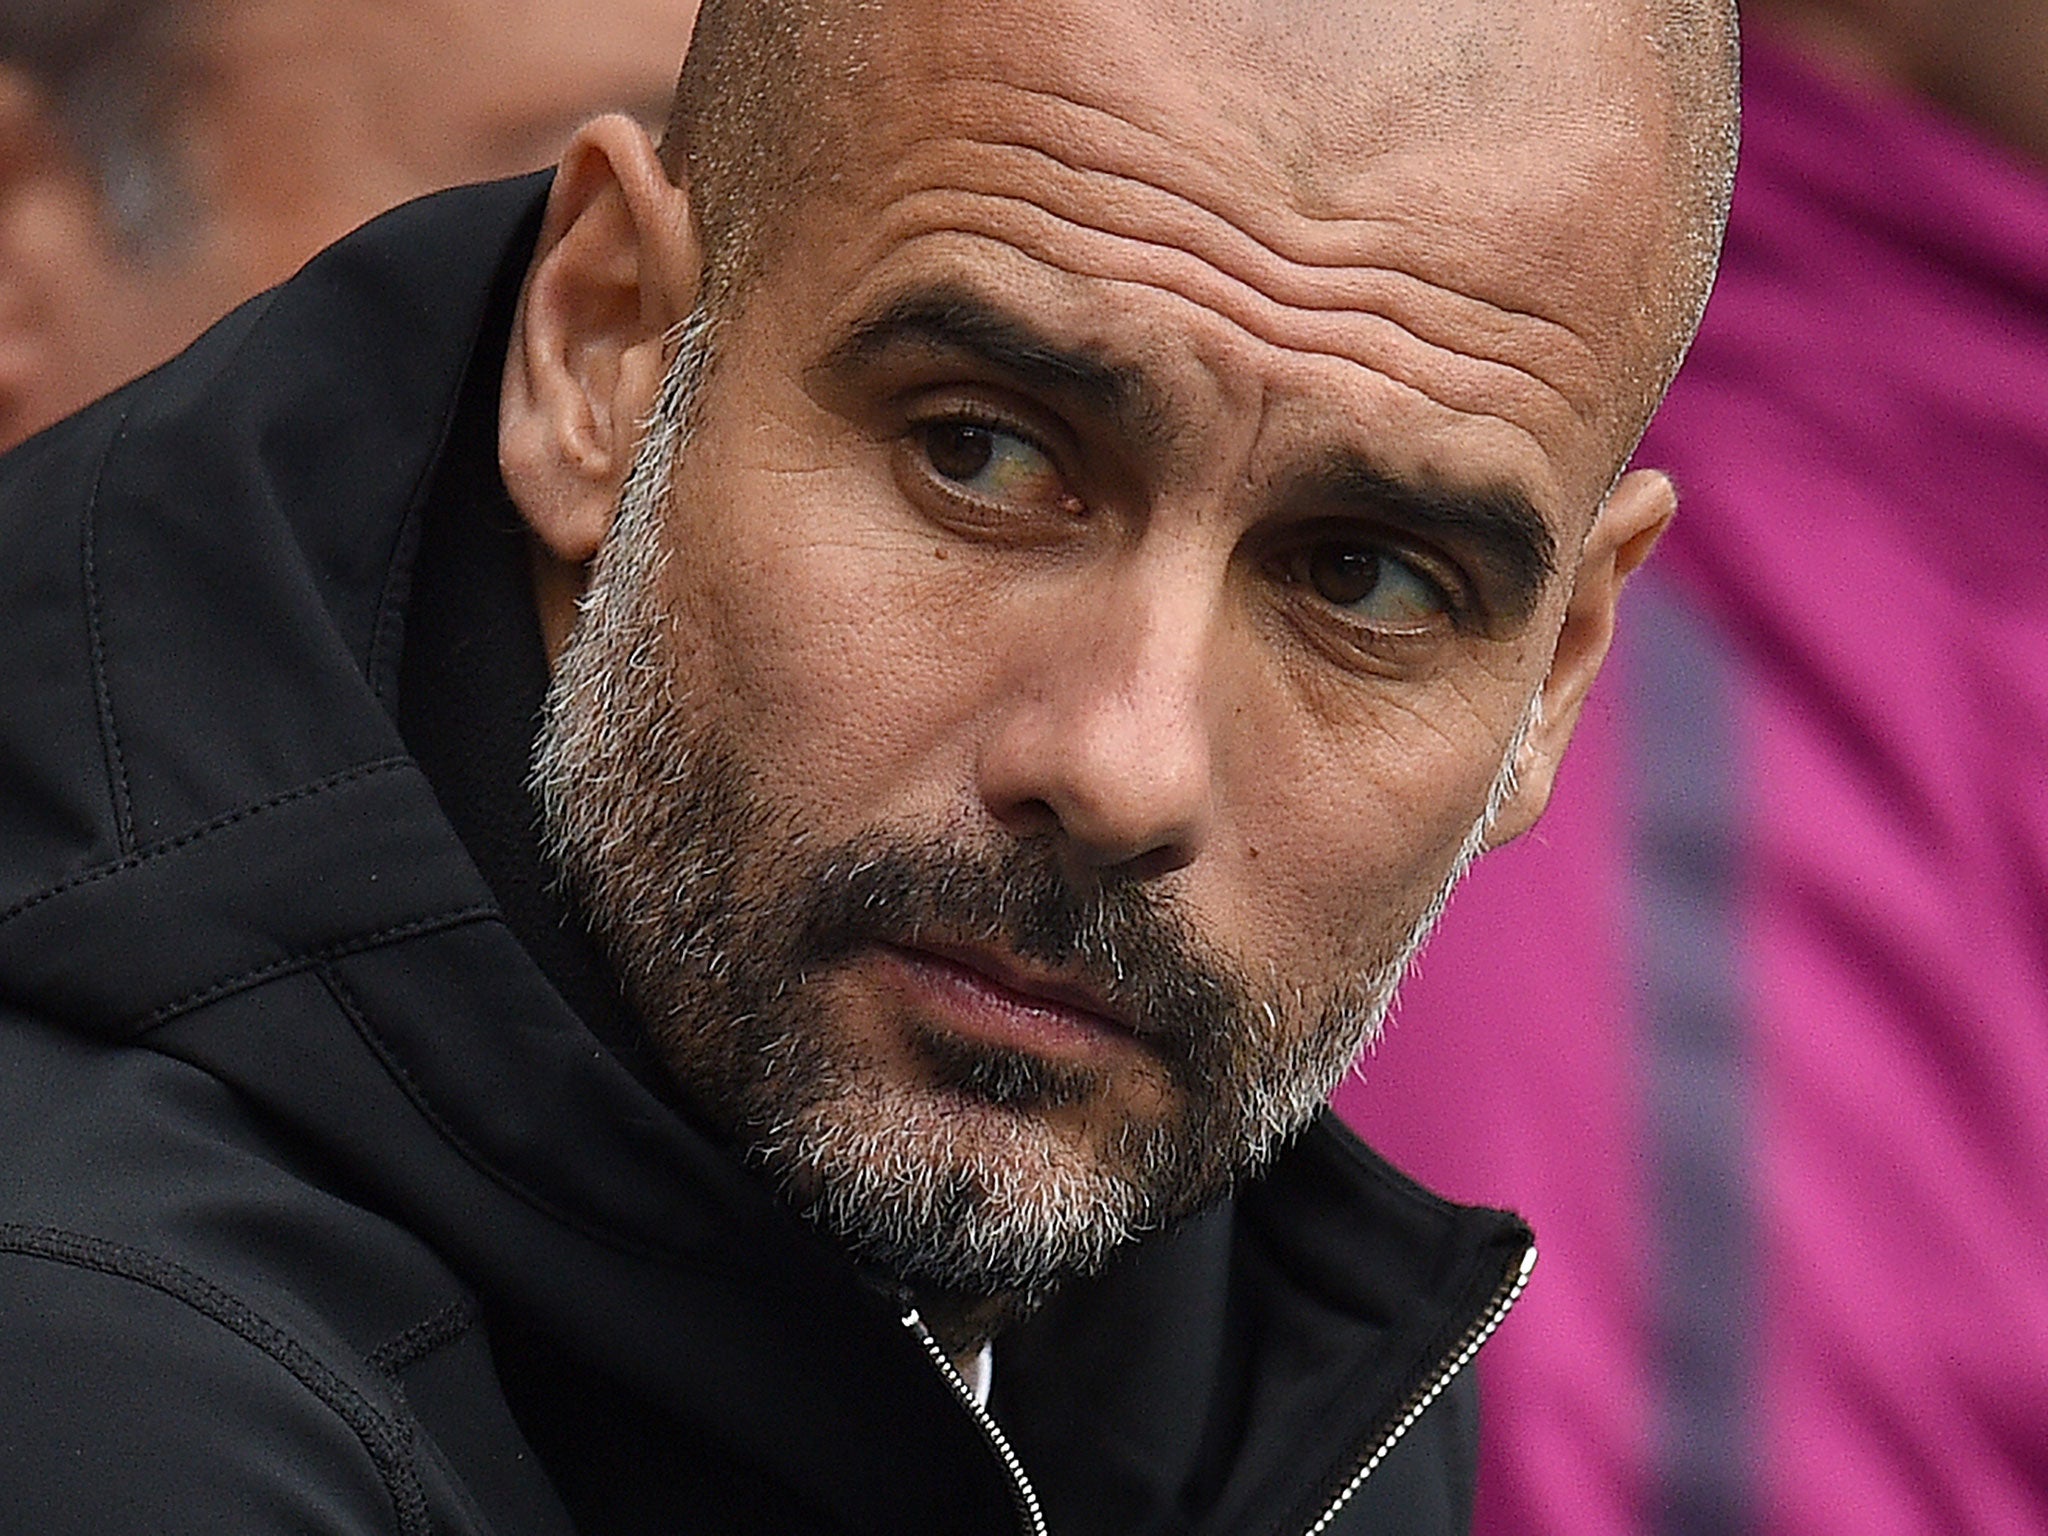 Pep Guardiola has played down his City's recent run of results